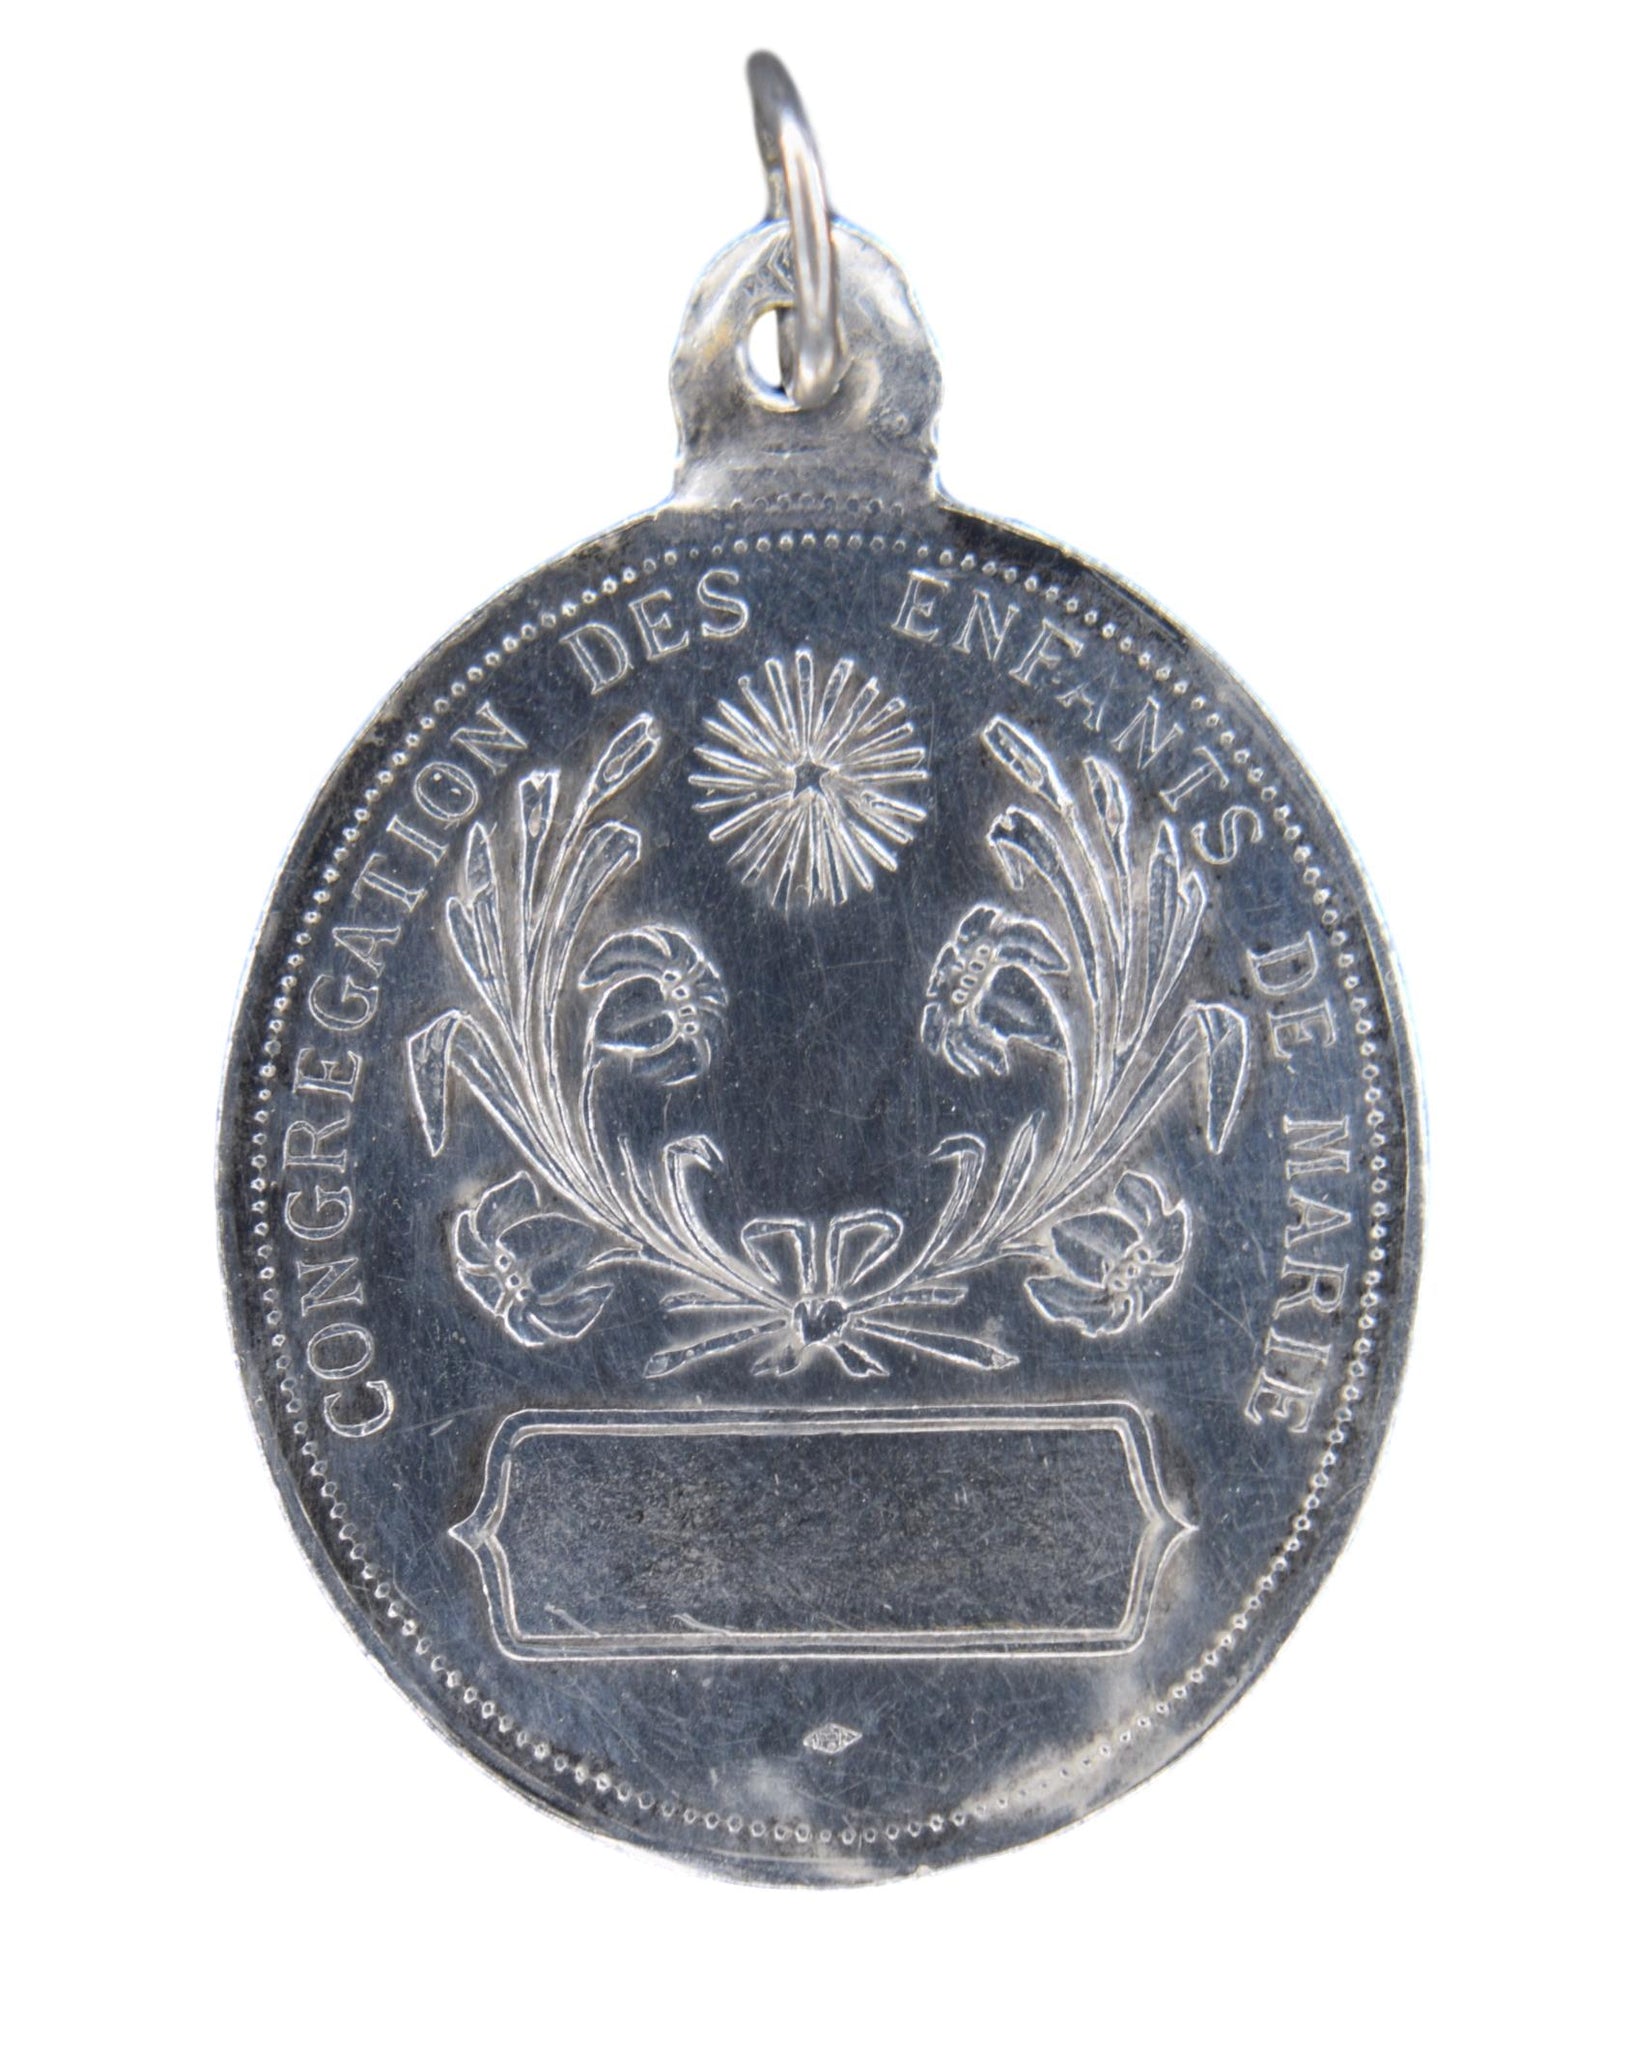 Religious Sterling Silver Medal - Charmantiques